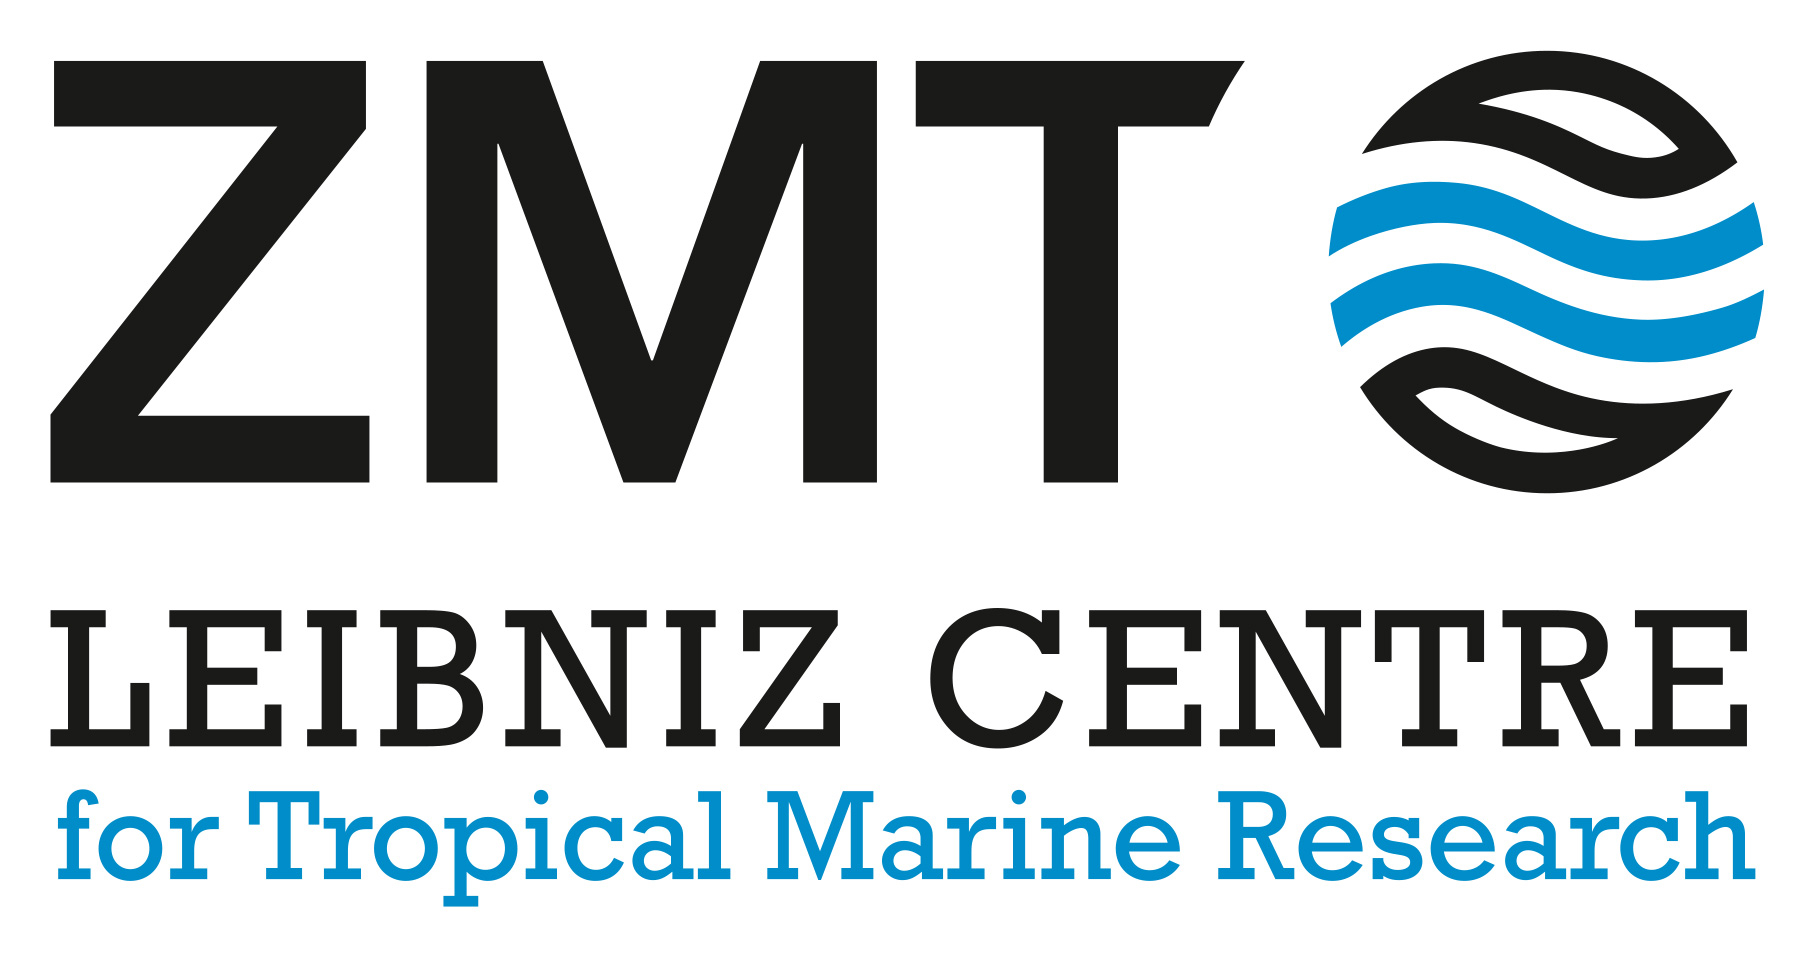 Find more information on the Leibniz Centre for Tropical Marine Research